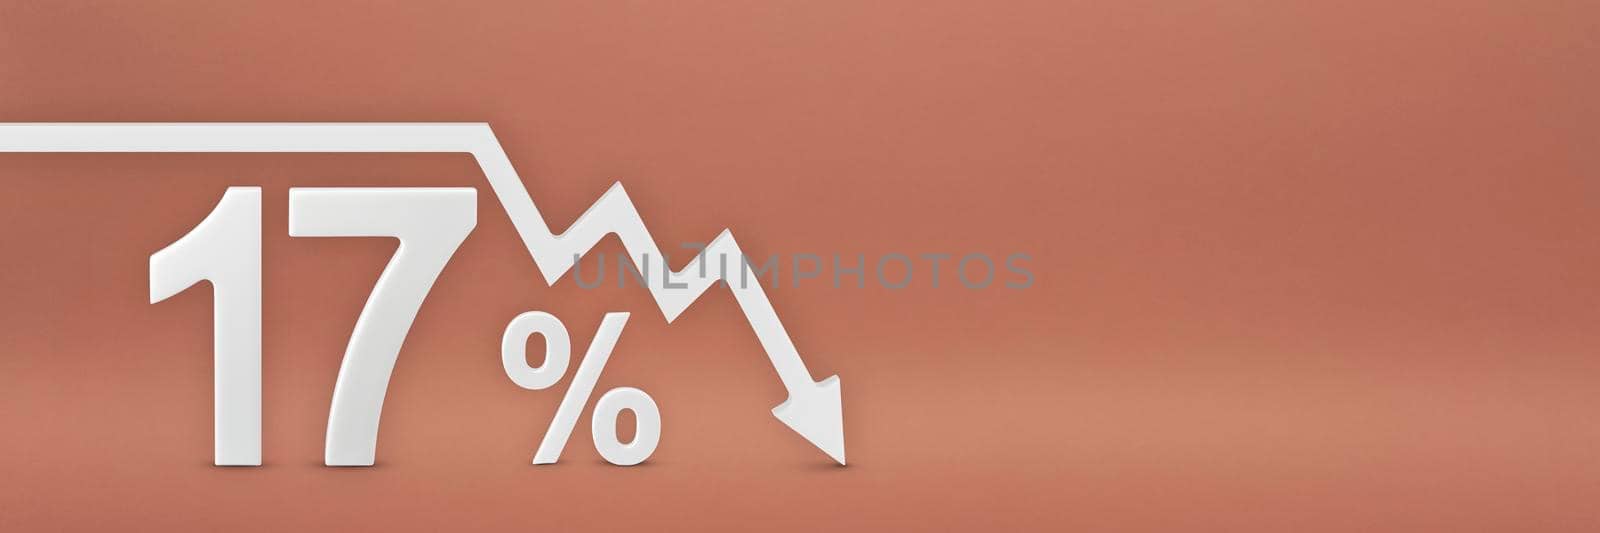 seventeen percent, the arrow on the graph is pointing down. Stock market crash, bear market, inflation. Economic collapse, collapse of stocks. 3d banner, 17 percent discount sign on a red background